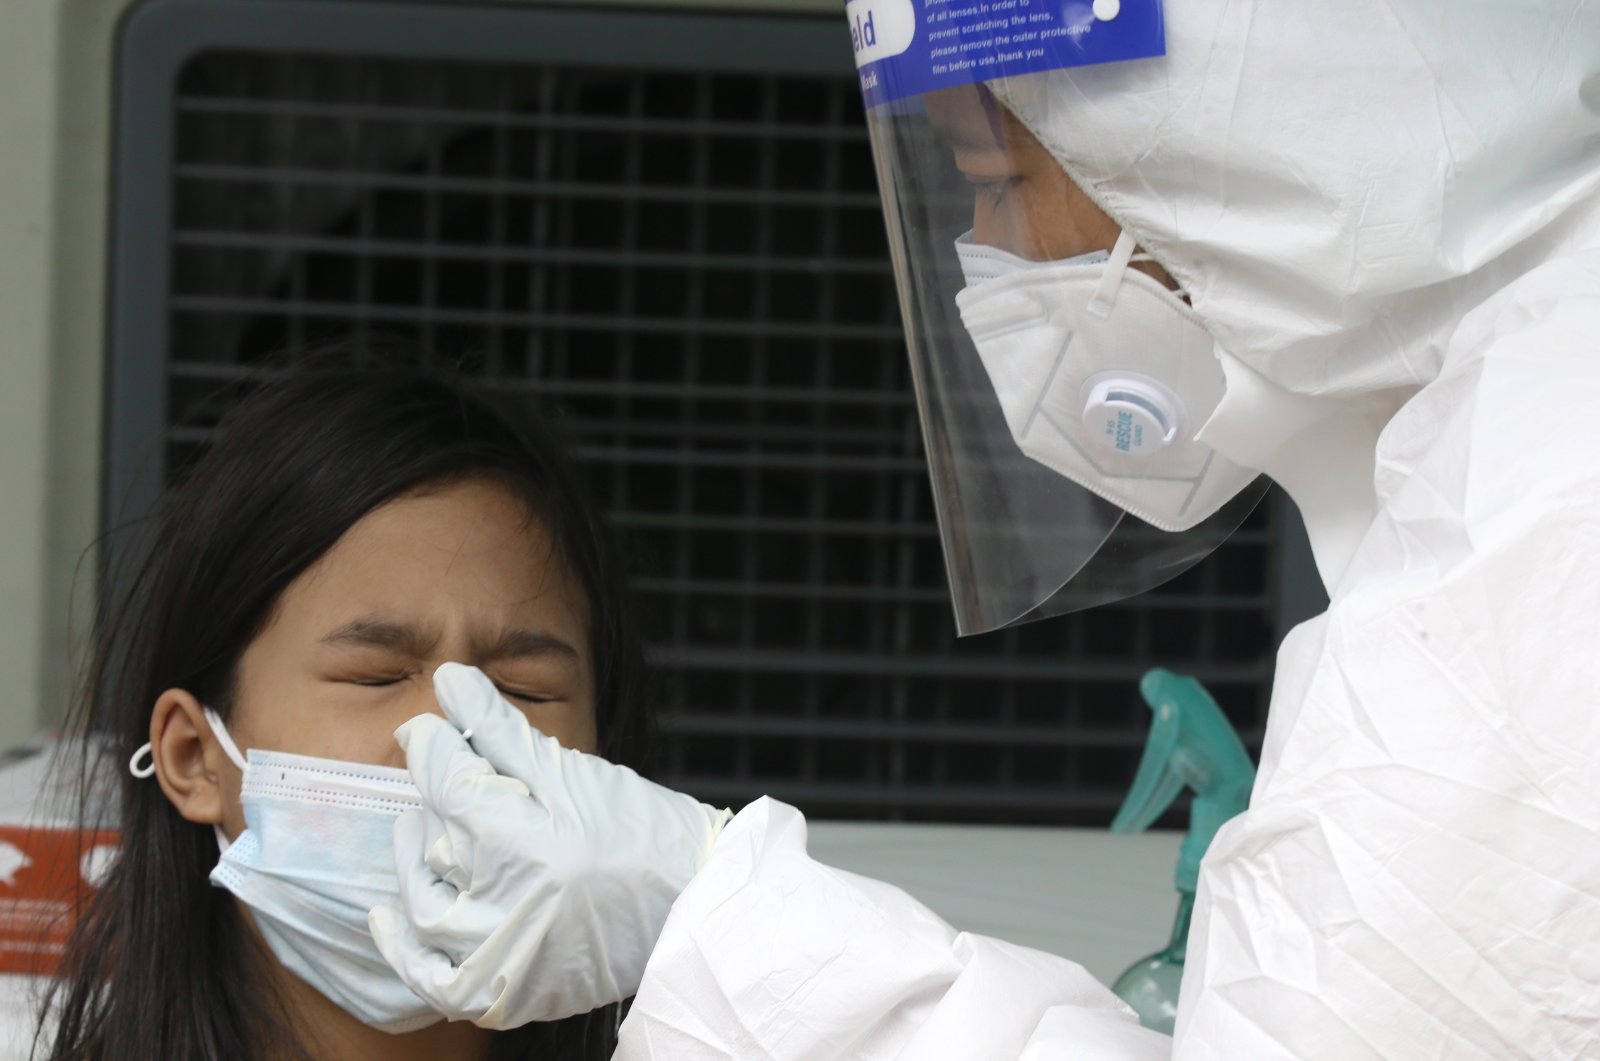 A Thai health official collects samples of a COVID-19 swab test during speed-up testing in a bid to curb the rapid spreading of the pandemic, in Bangkok, Thailand, 19 July 2021. (EPA Photo)